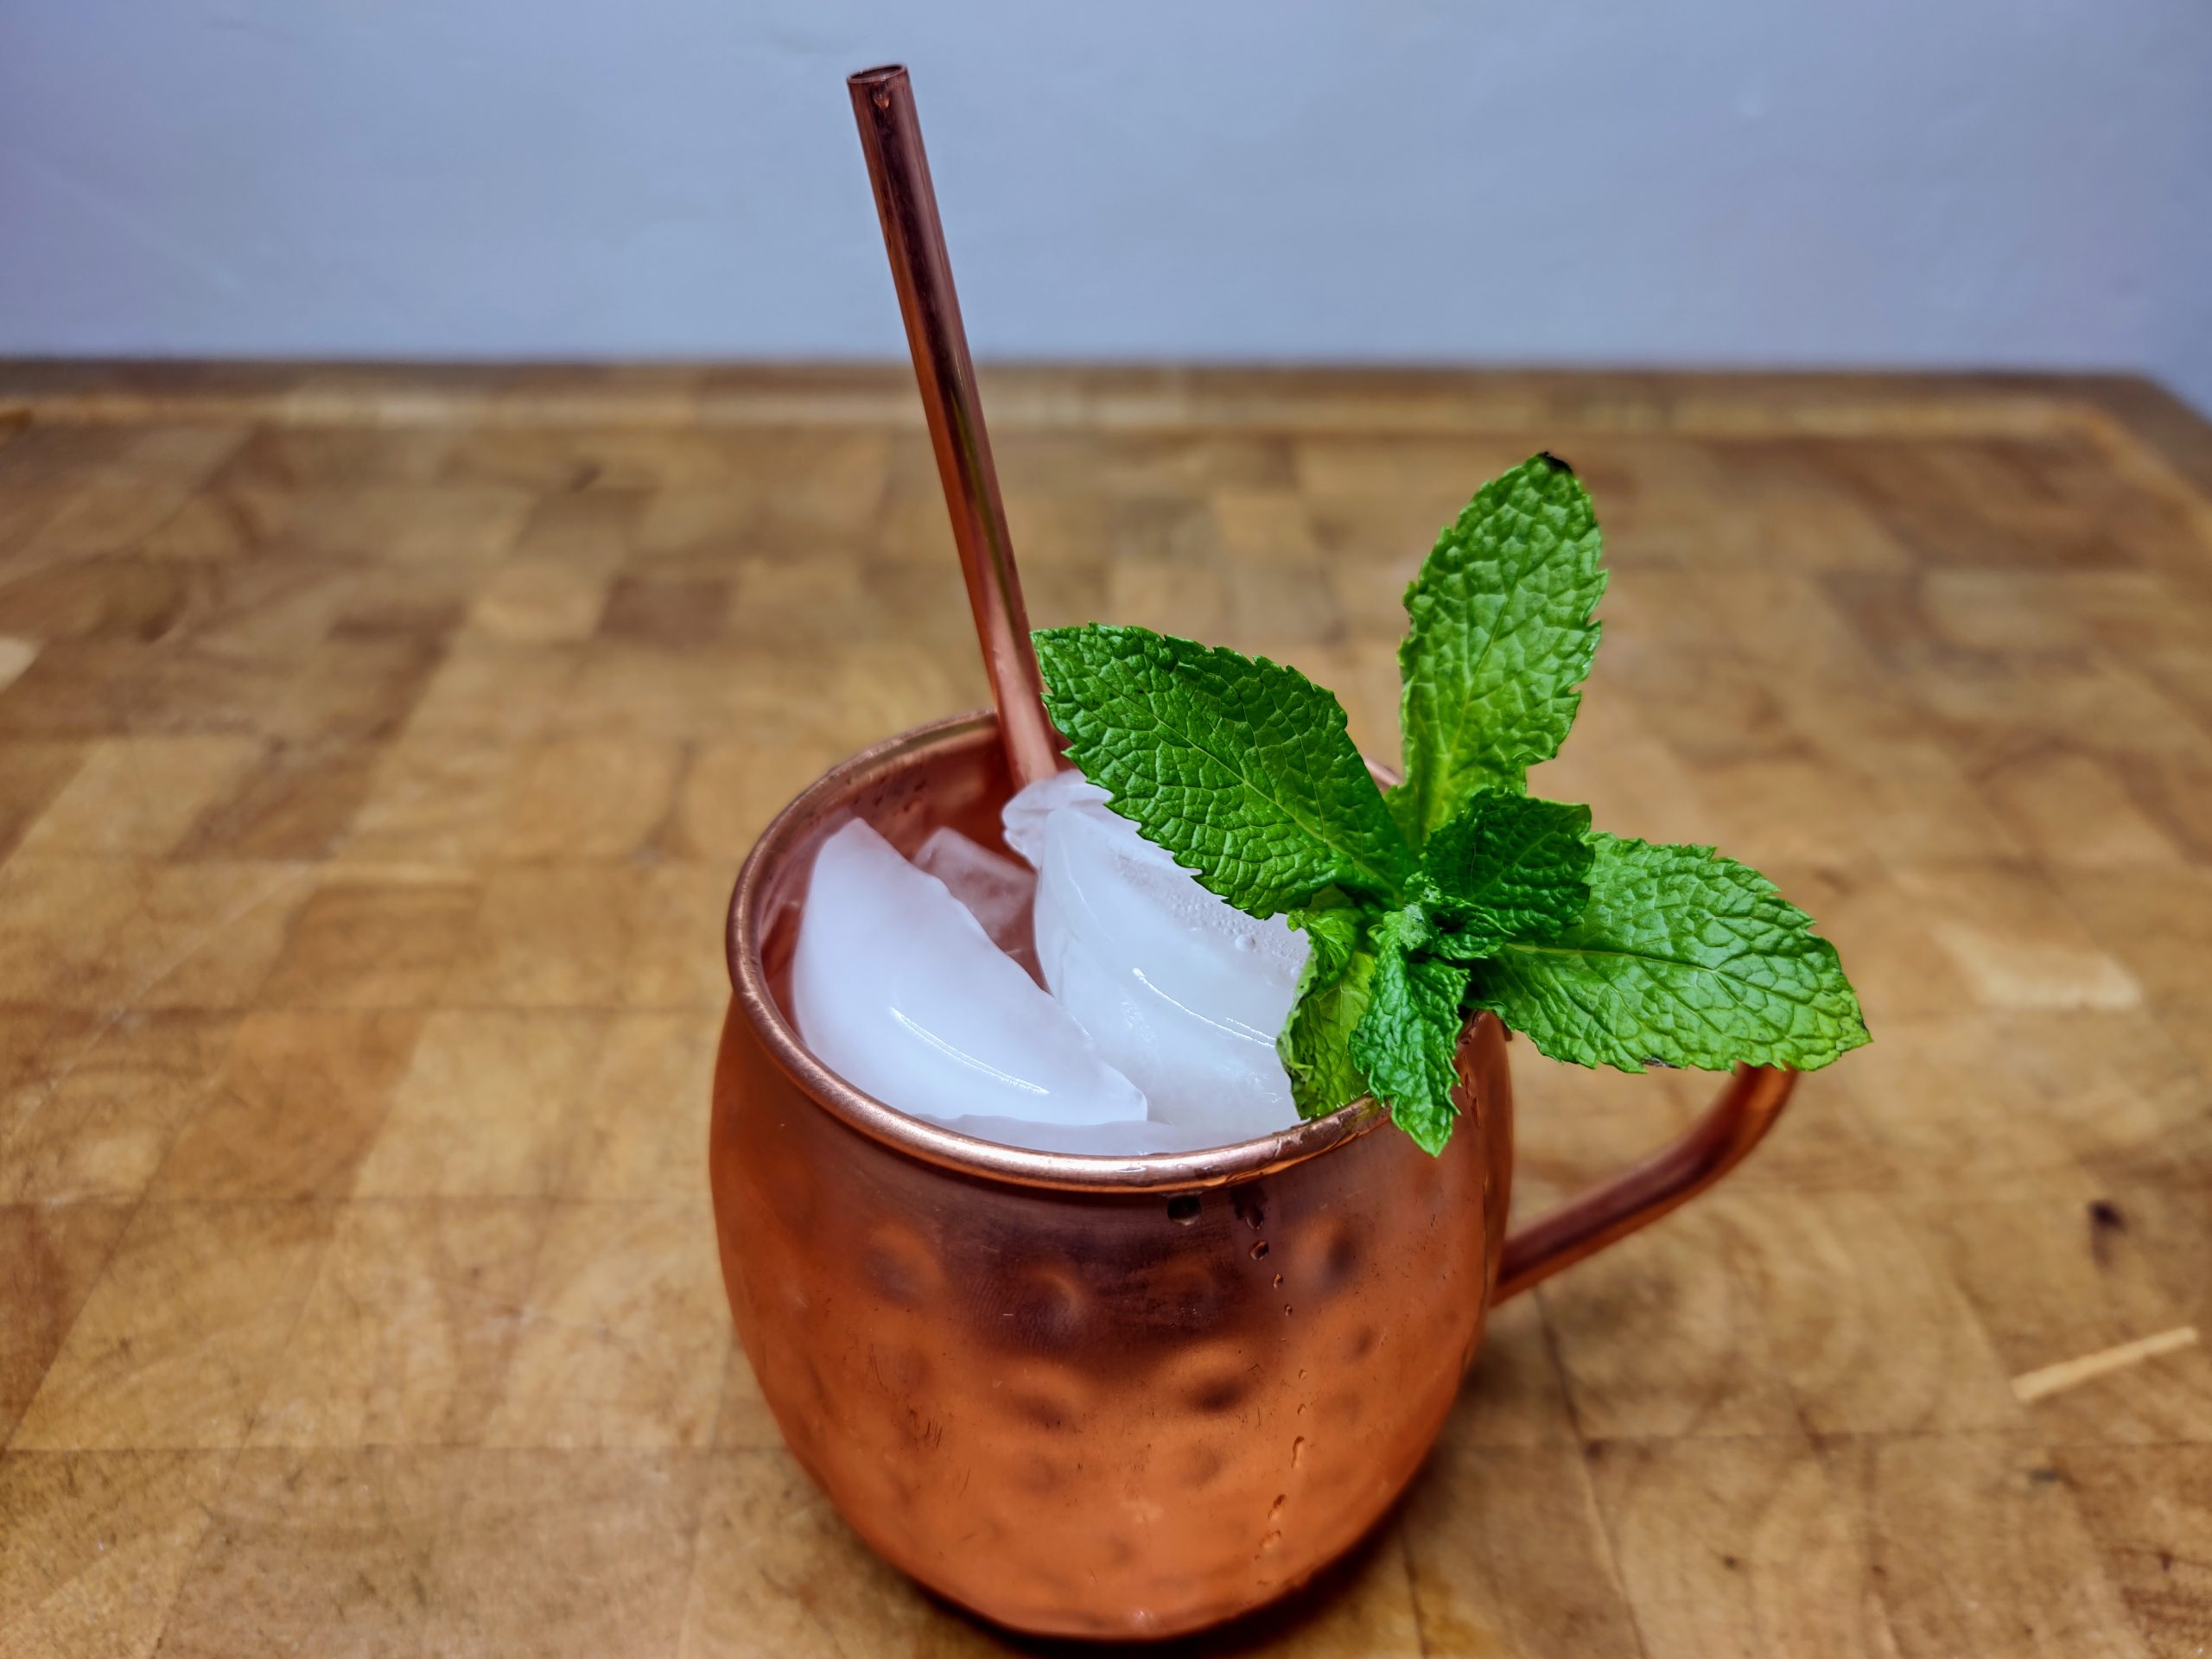 Grape moscow mule with a sprig of mint and copper straw on a wooden table.